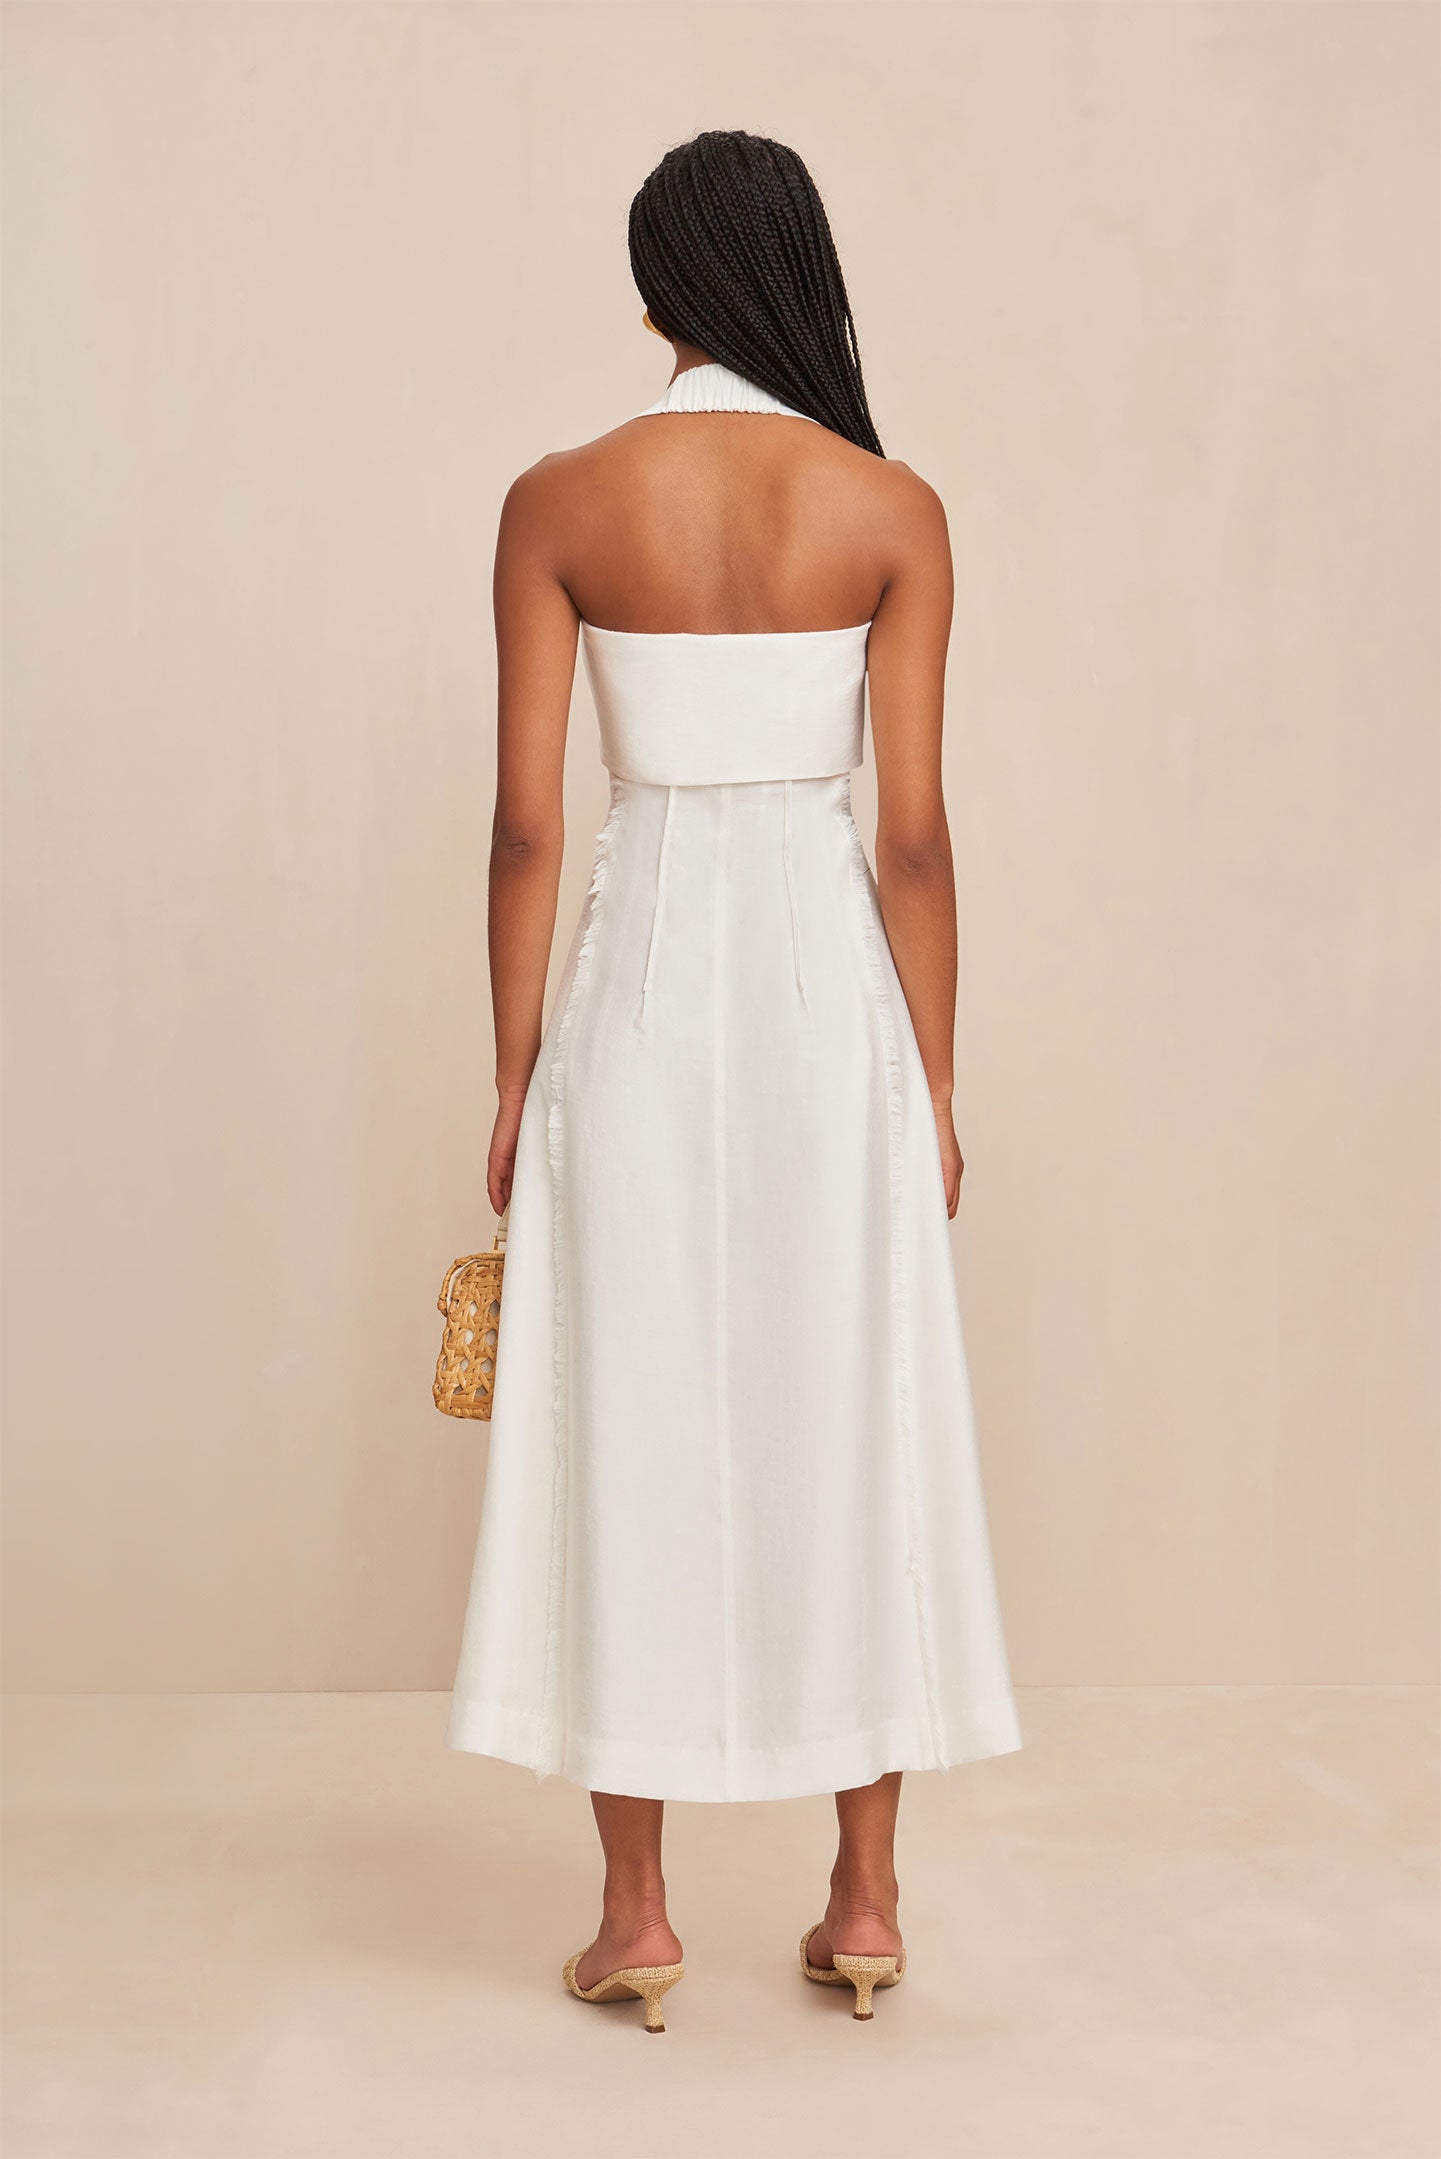 BRYLIE DRESS - OFF WHITE